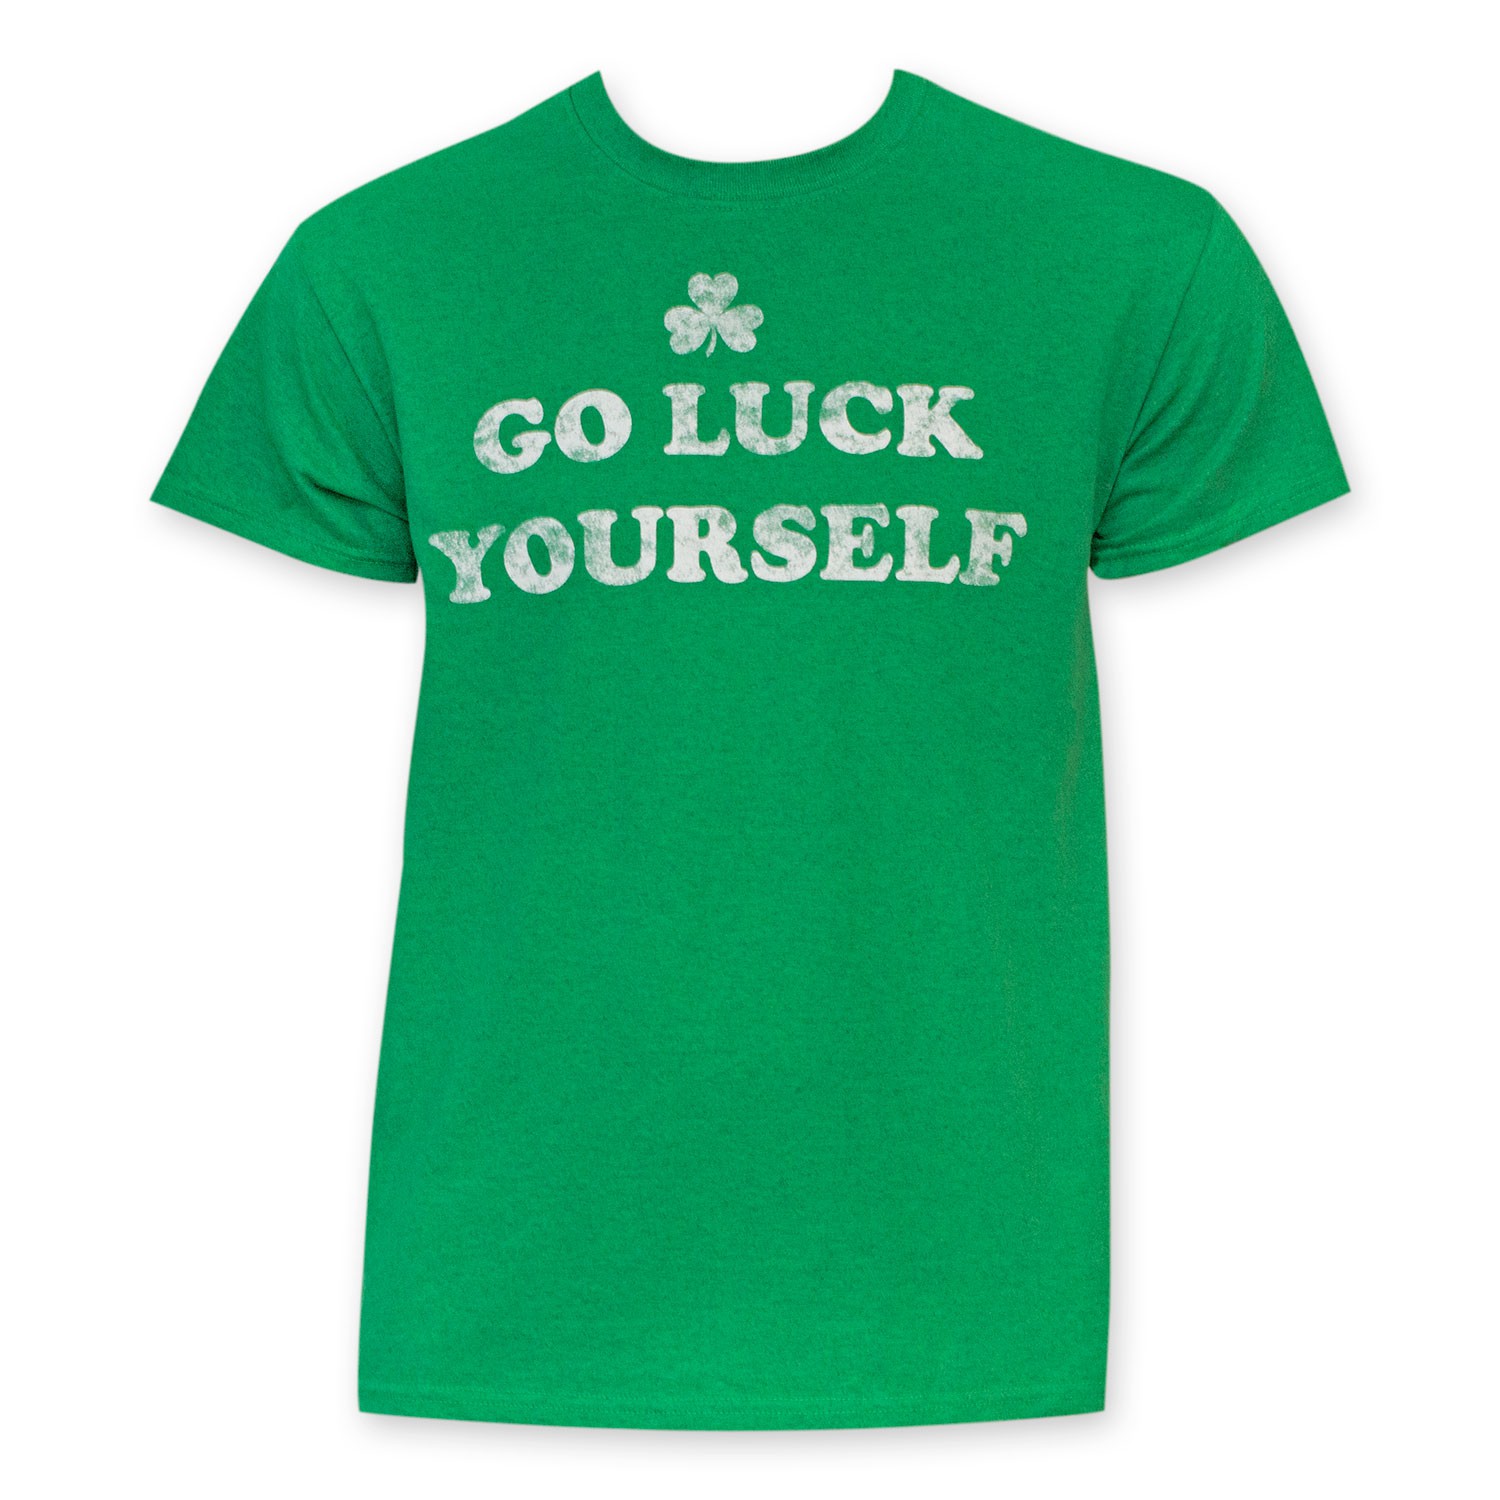 St. Patrick's Day Men's Green Go Luck Yourself Tee Shirt